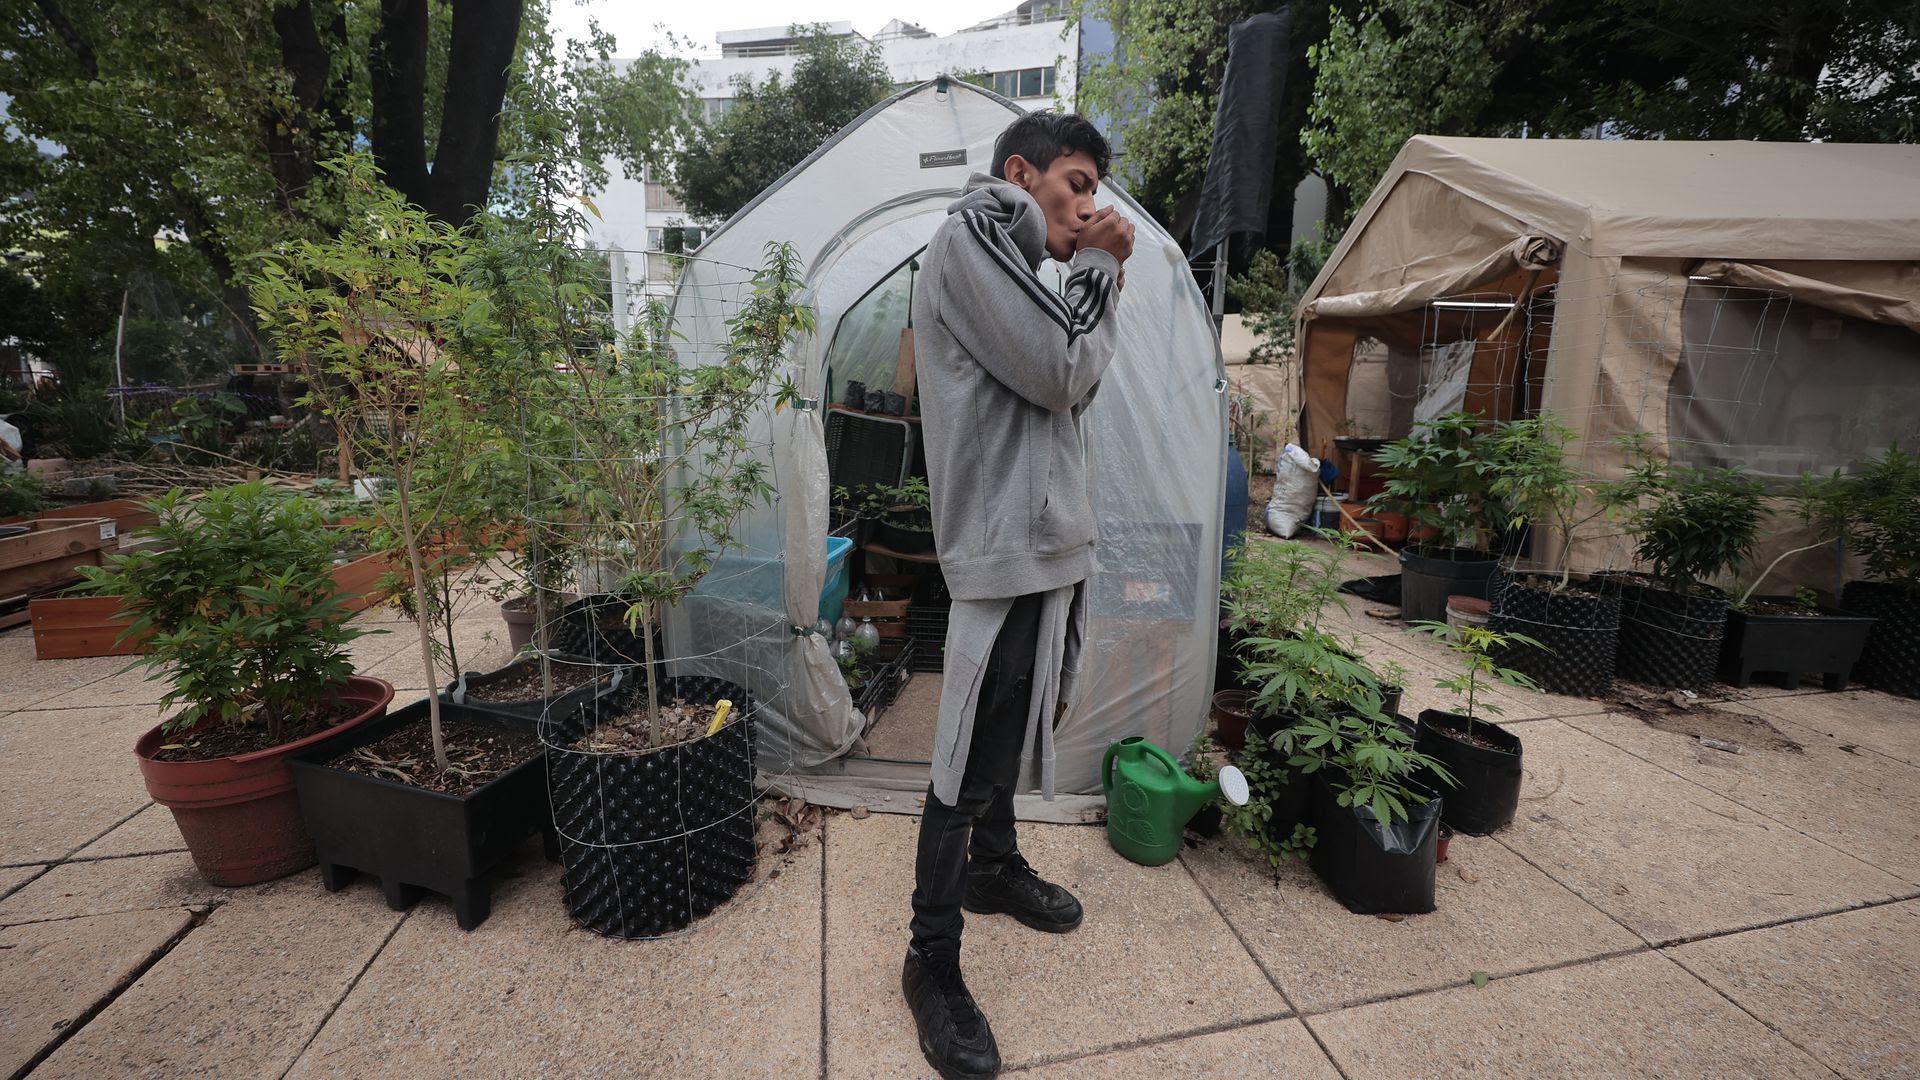 A man lights a joint next to a greenhouse